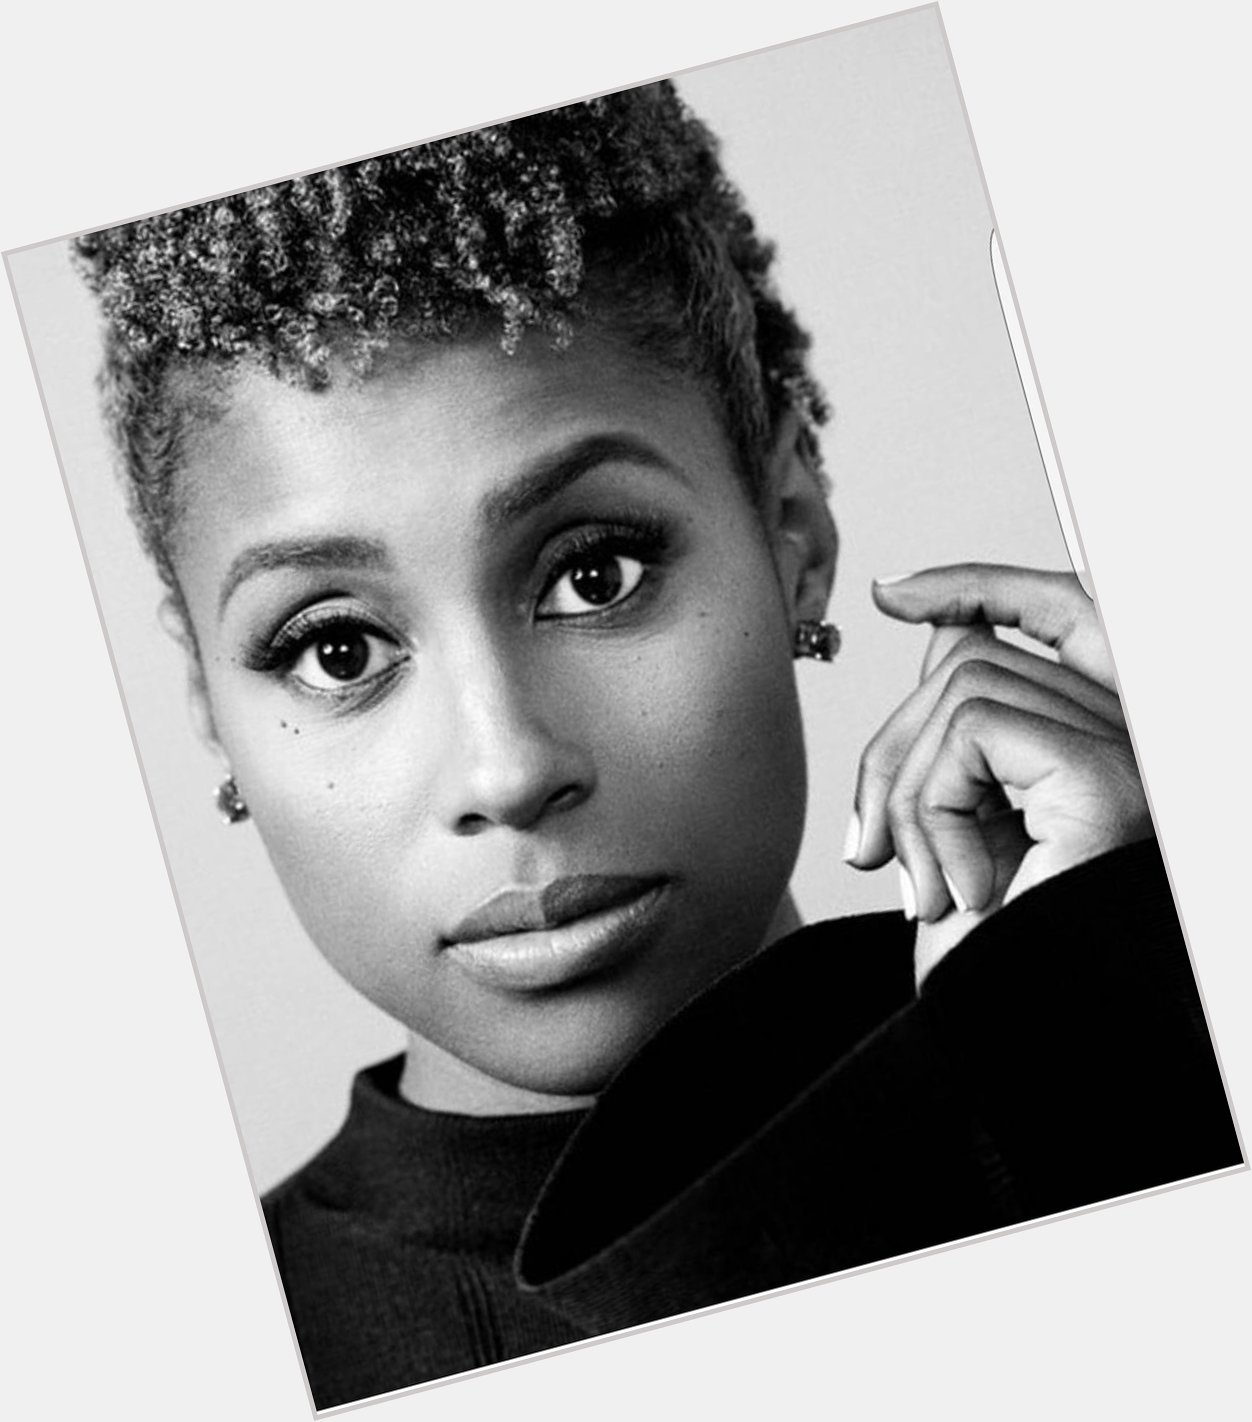 Happy Birthday Issa Rae!
The Walker Collective - A Law Firm For Creatives
 